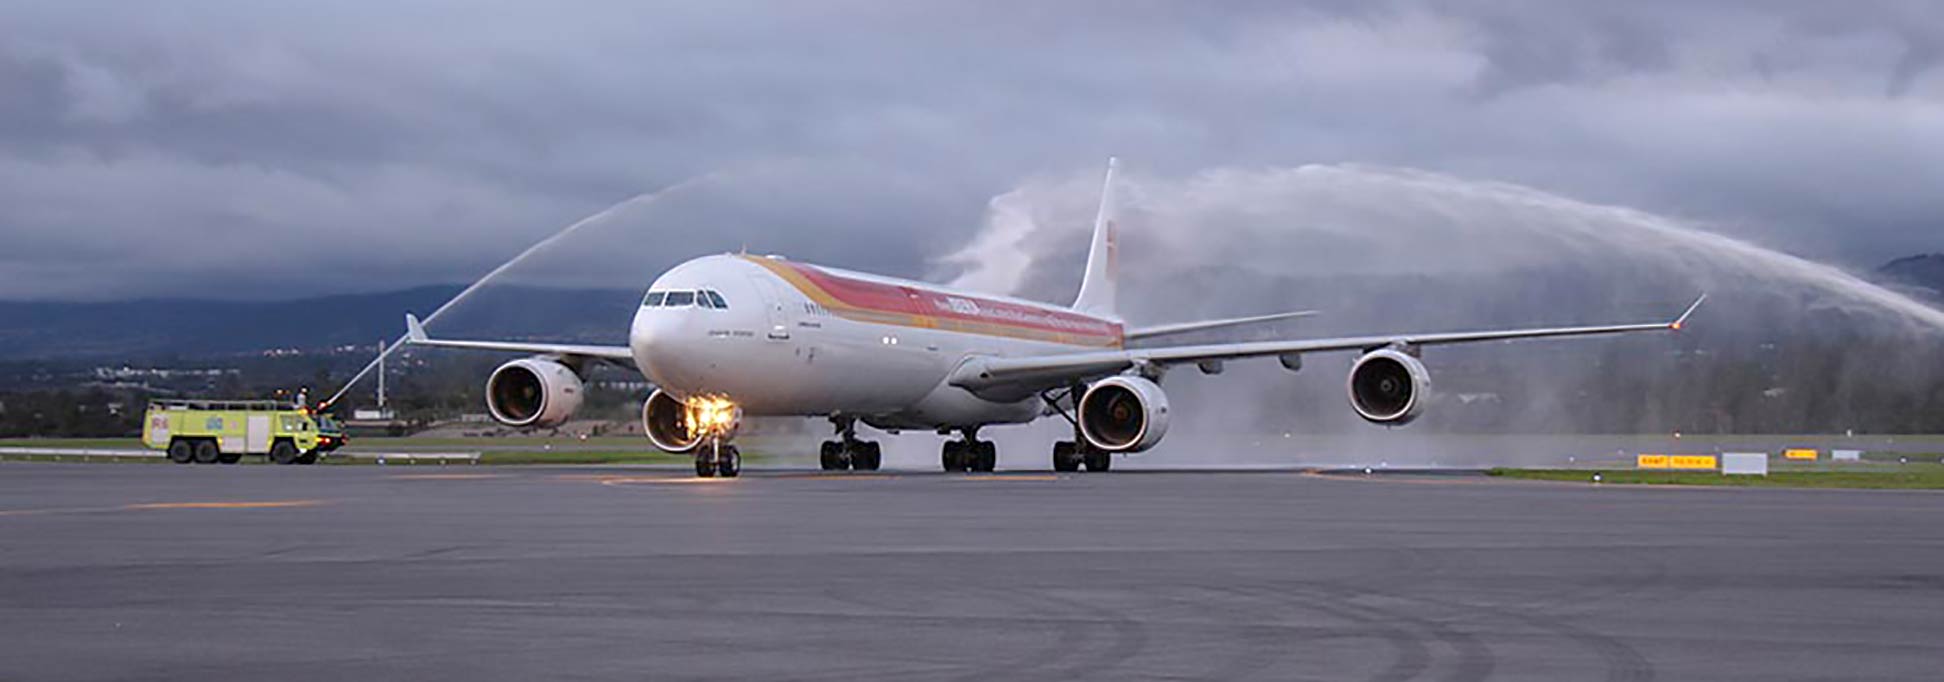 Water salute for Airbus A340-600 at Quito - Mariscal Sucre International Airport (UIO), 